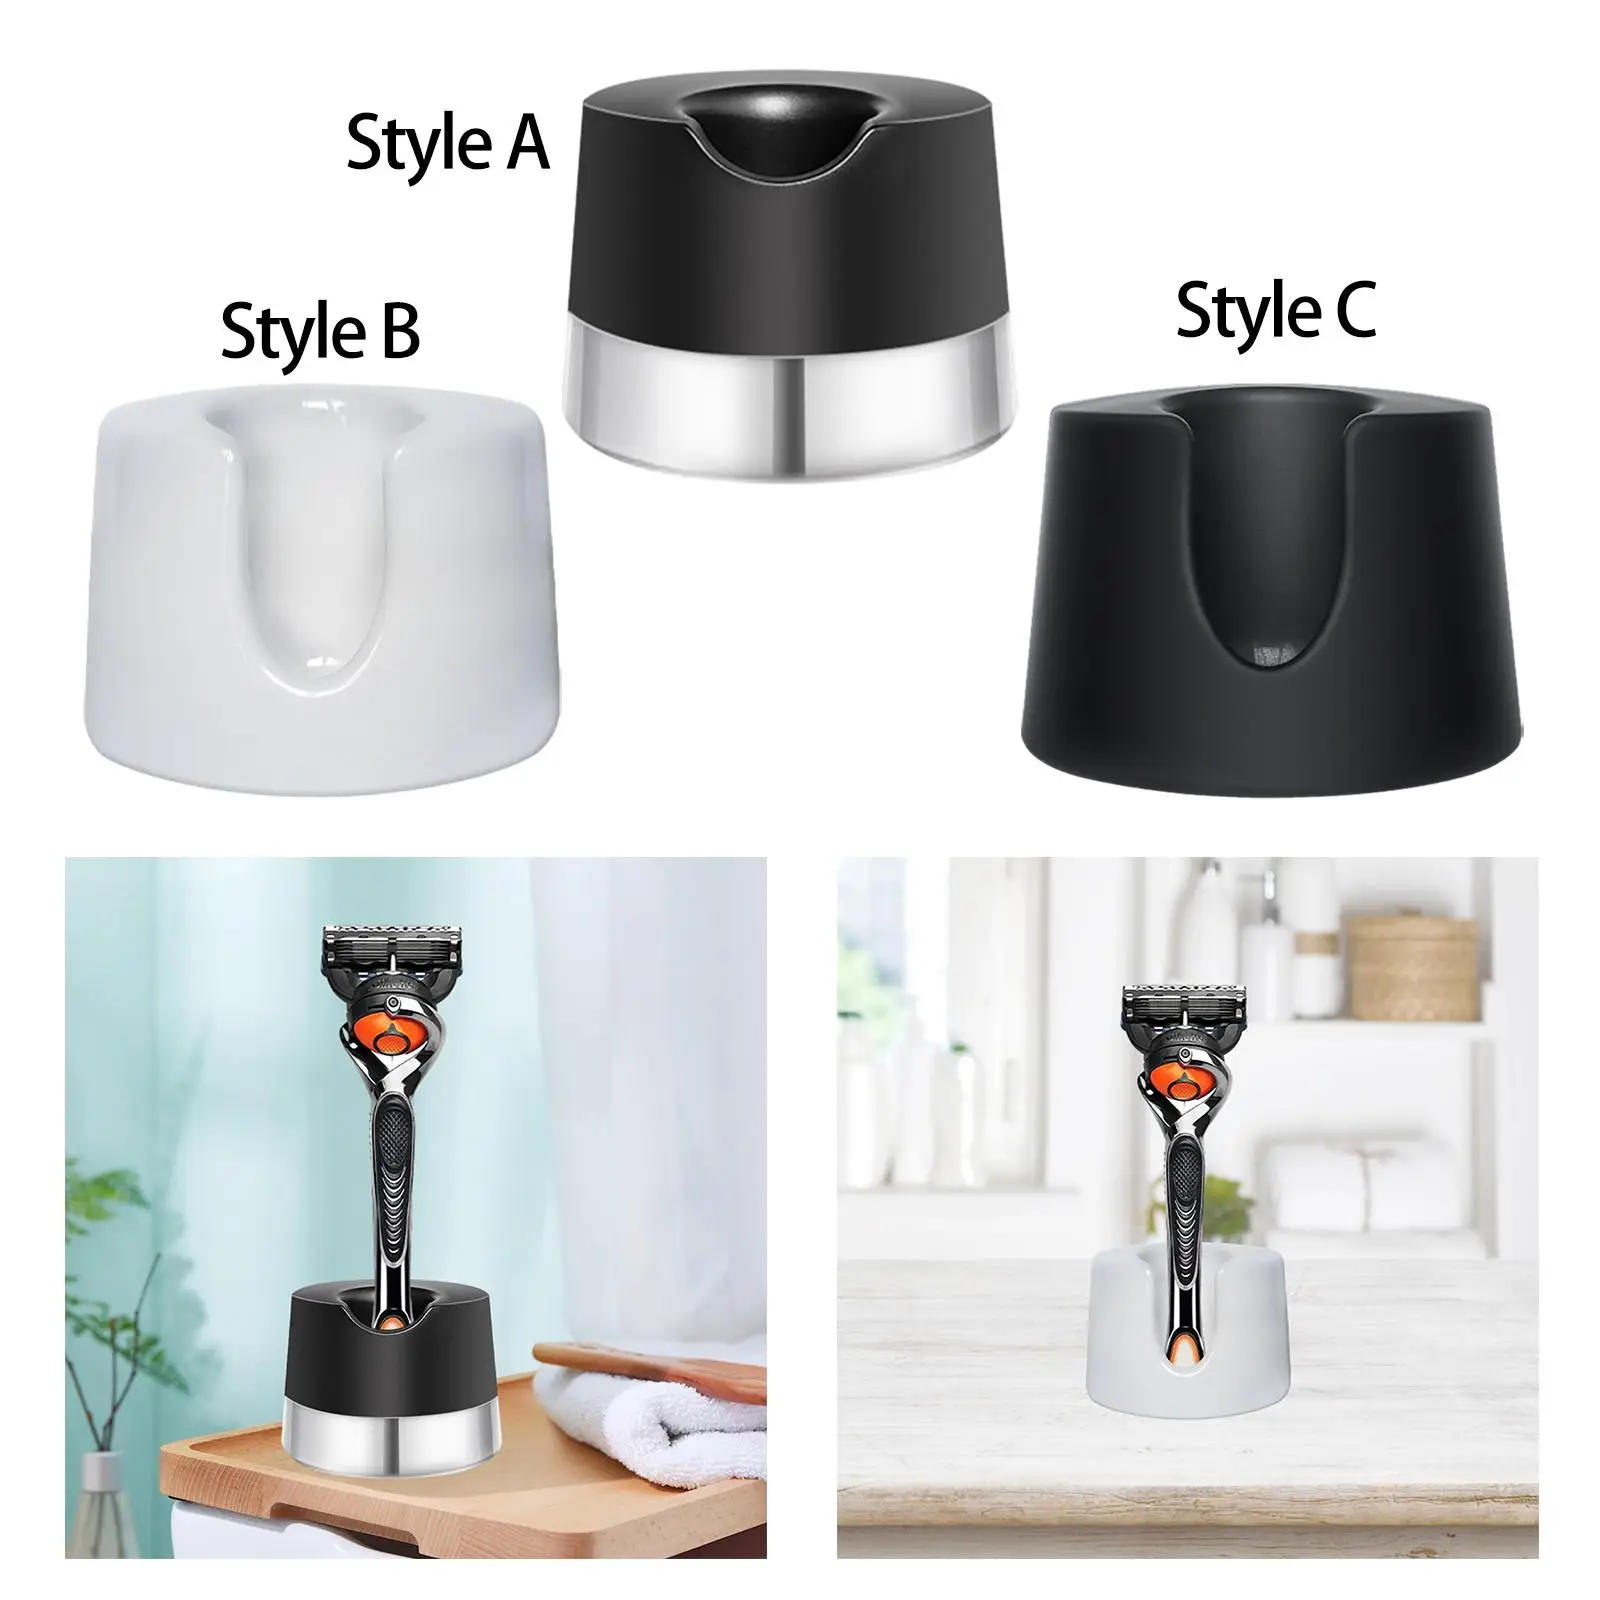 Manual Shaver Holder Drying Stand to Use Durable Countertops Accessories Safety Shaver Holder Base Shaver Holder for Skin